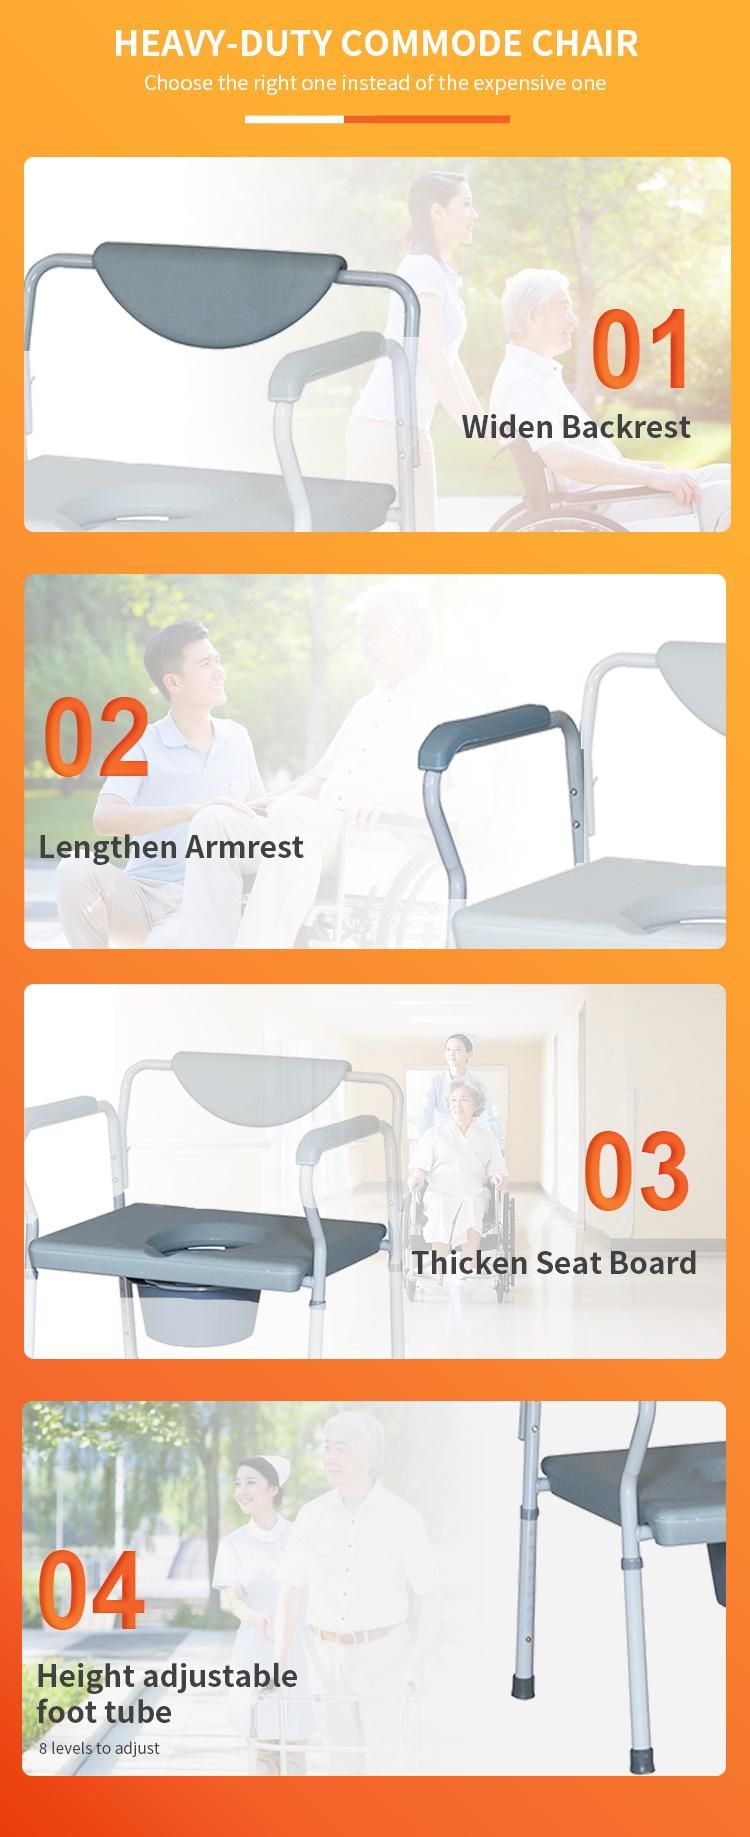 Homecare Patient Toilet Seat Hot Sales Heavy-Duty Bathroom Steel Commode Chair with Backrest Heavy Duty Steel Commode Chair